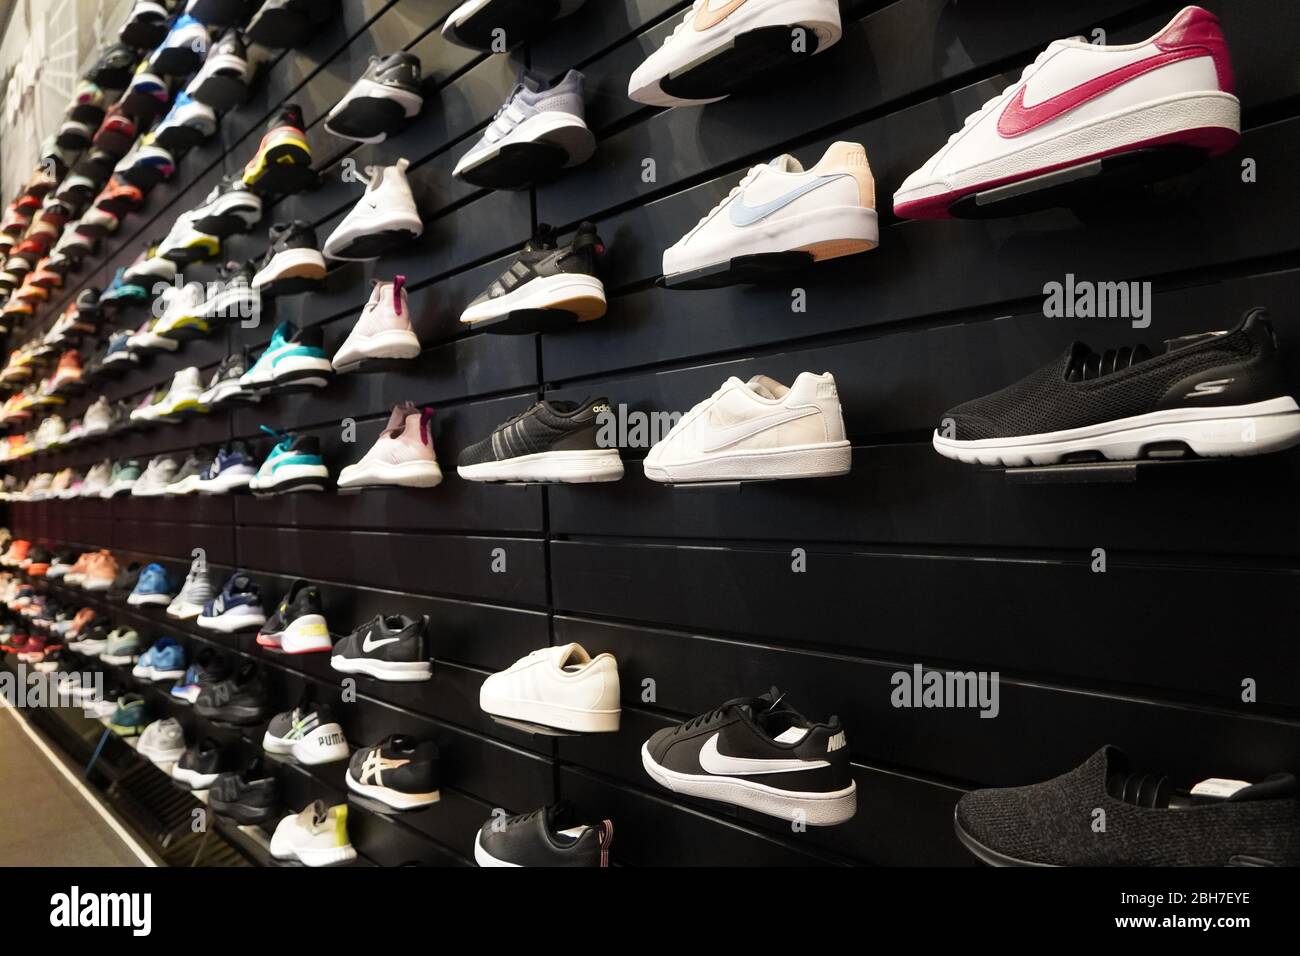 Shop display of a lot of Sports shoes on a wall. A view of a wall of shoes inside the store. Modern new stylish sneakers running shoes for men and wom Stock Photo